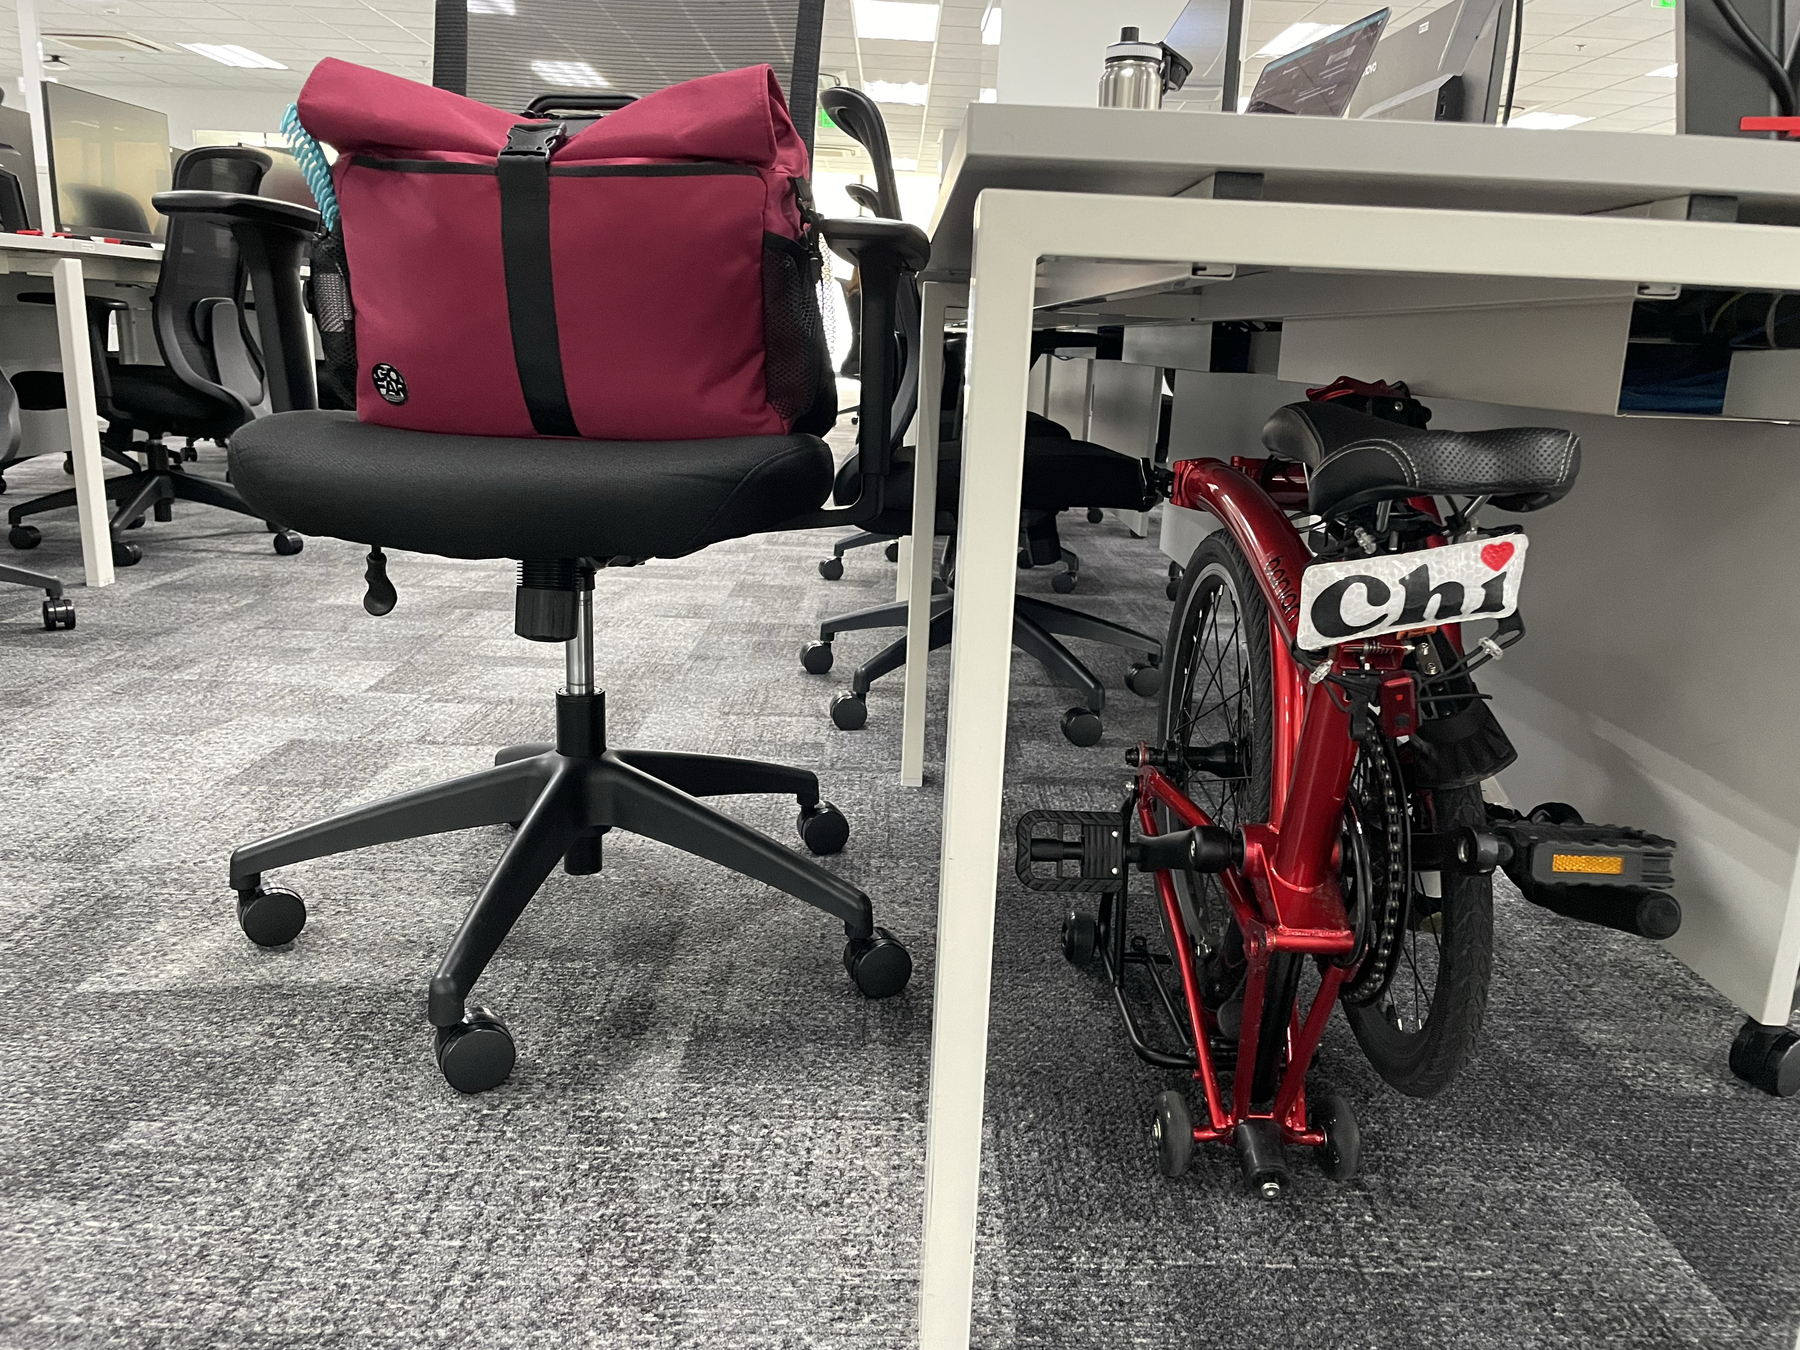 Chi’s trifold bike in the fully folded state fitted under her table at the office, and her bike bag placed on her computer chair.